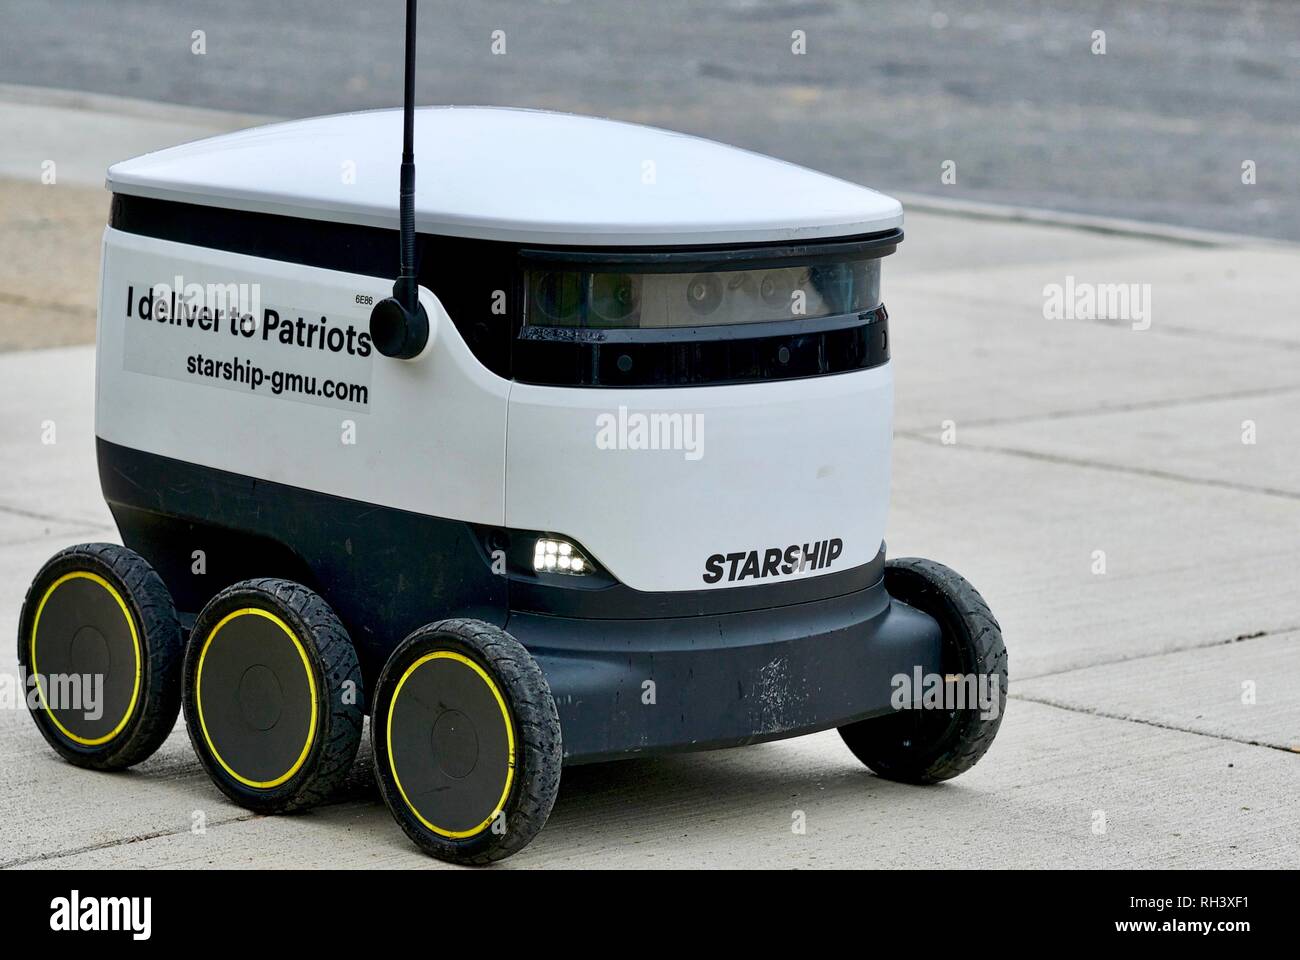 Fairfax, Virginia, USA - January 29, 2019: An autonomous food delivery robot  travels enroute to a customer on George Mason University's main campus  Stock Photo - Alamy